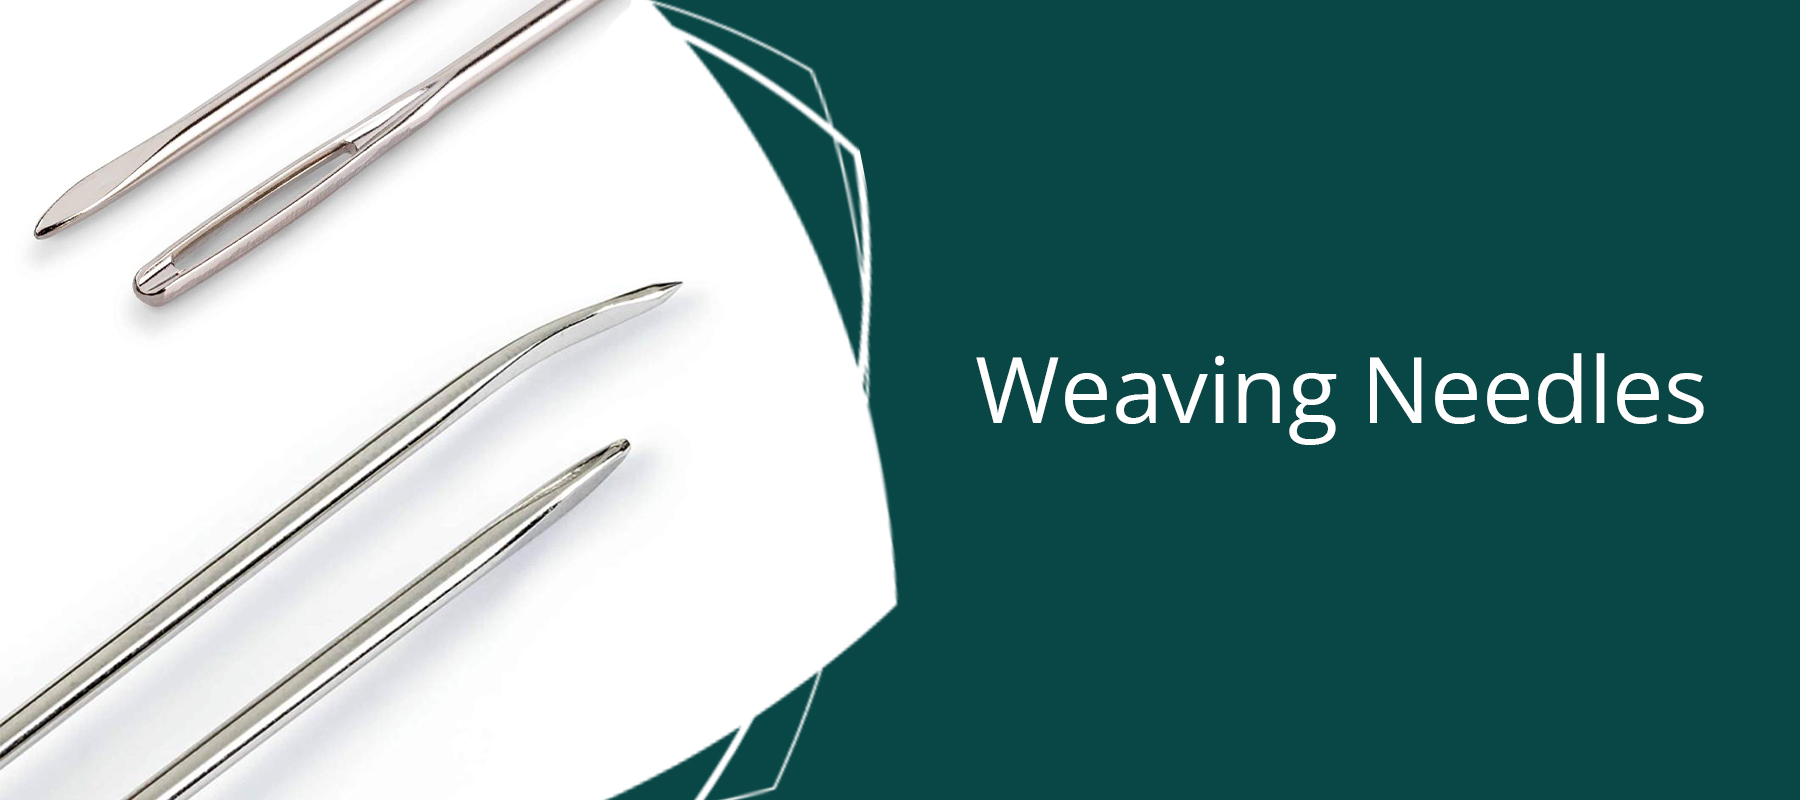 Weaving Needles: Finish your Projects with Ease